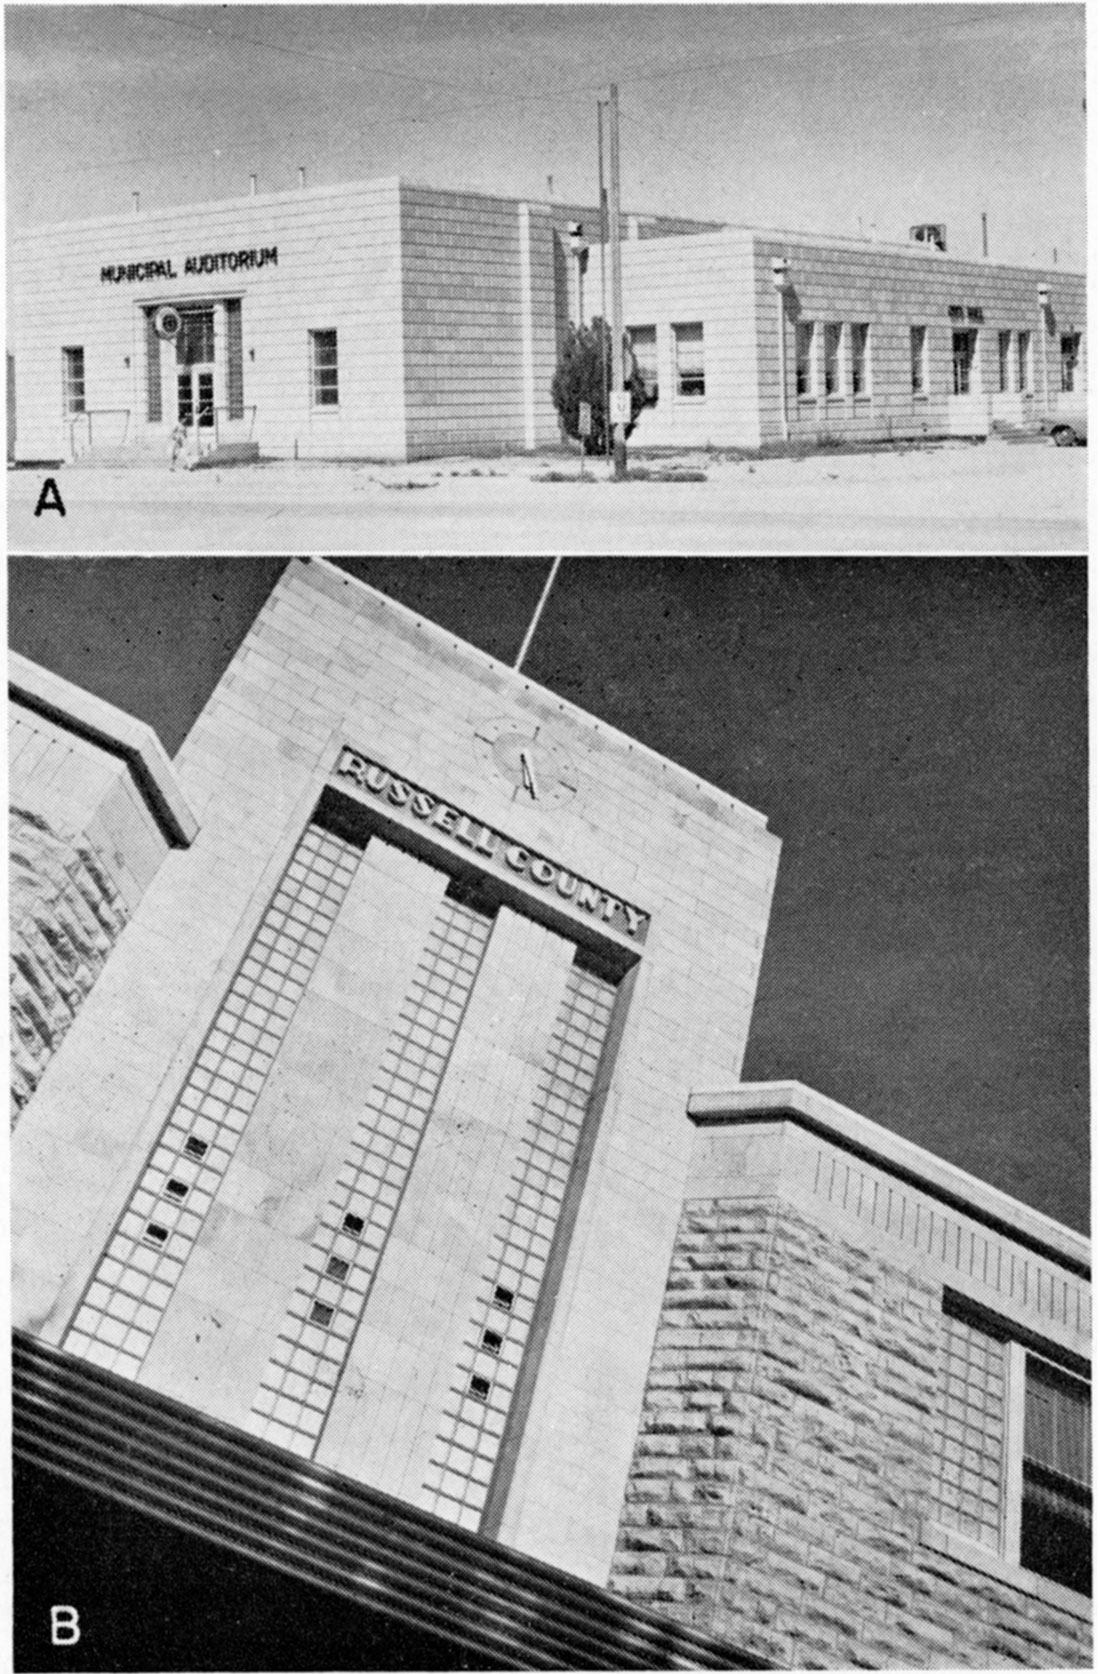 Two black and white photos; top is Municipal Auditorium at Leoti constructed of Smoky Hill cut stone; bottom is Russell County Court House, Fencepost limestone, combining pitch-face ashlar and cut stone.